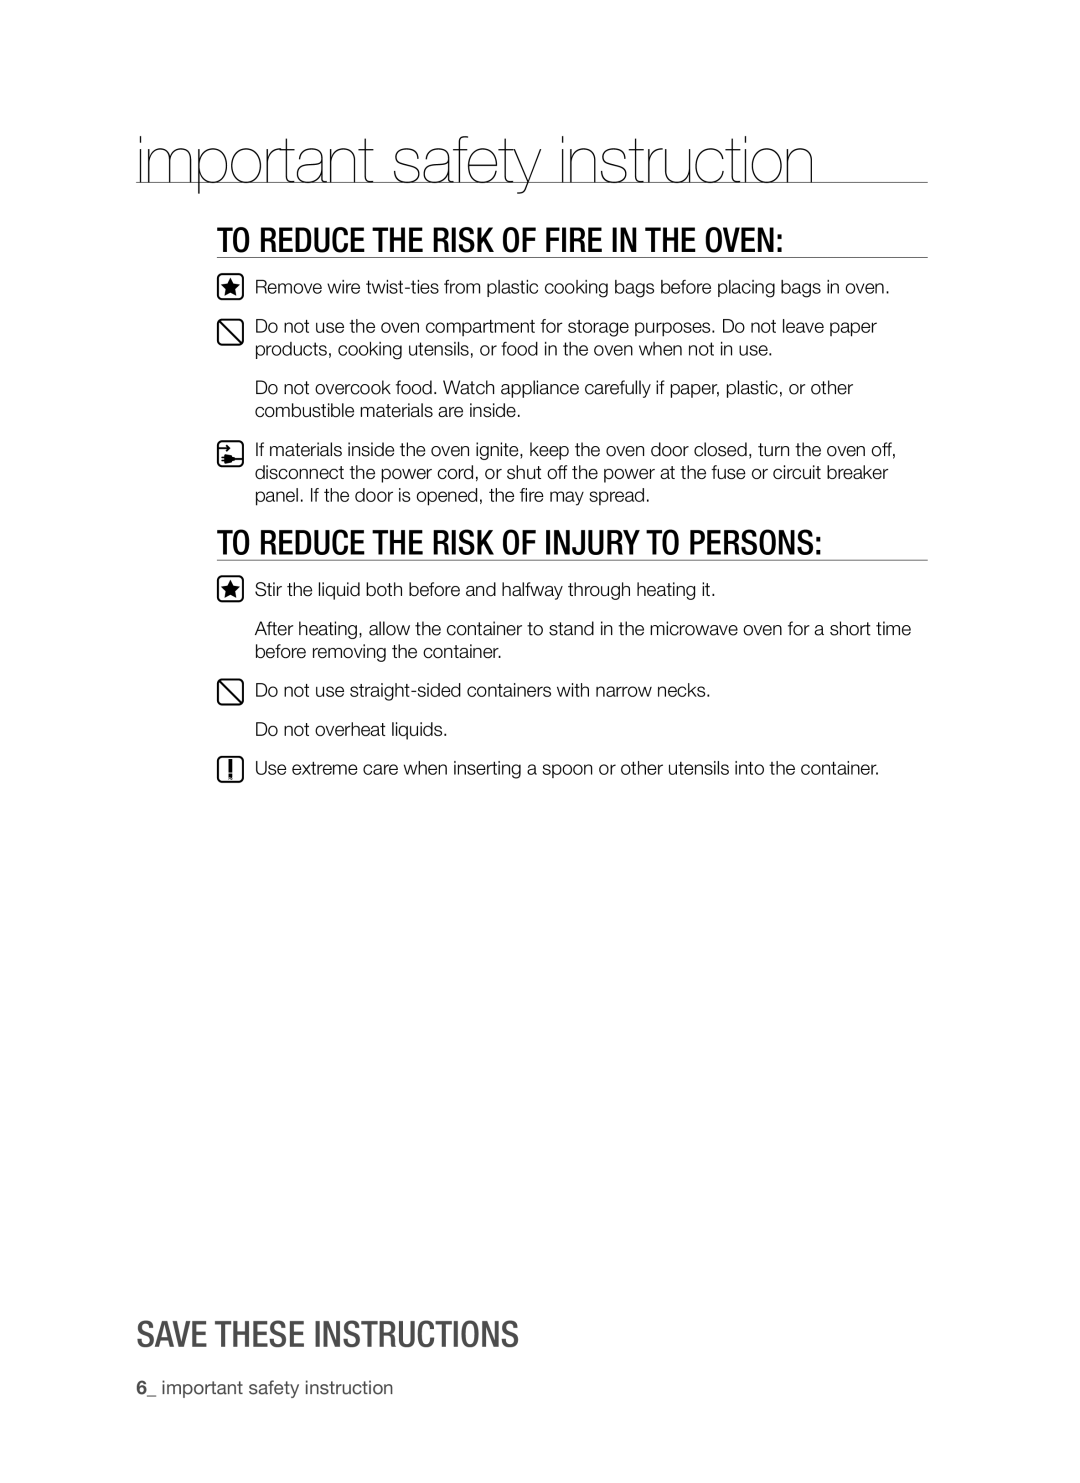 Samsung SMH7185 To reduce the risk of fire in the oven, To reduce the risk of injury to persons, Save these instructions 